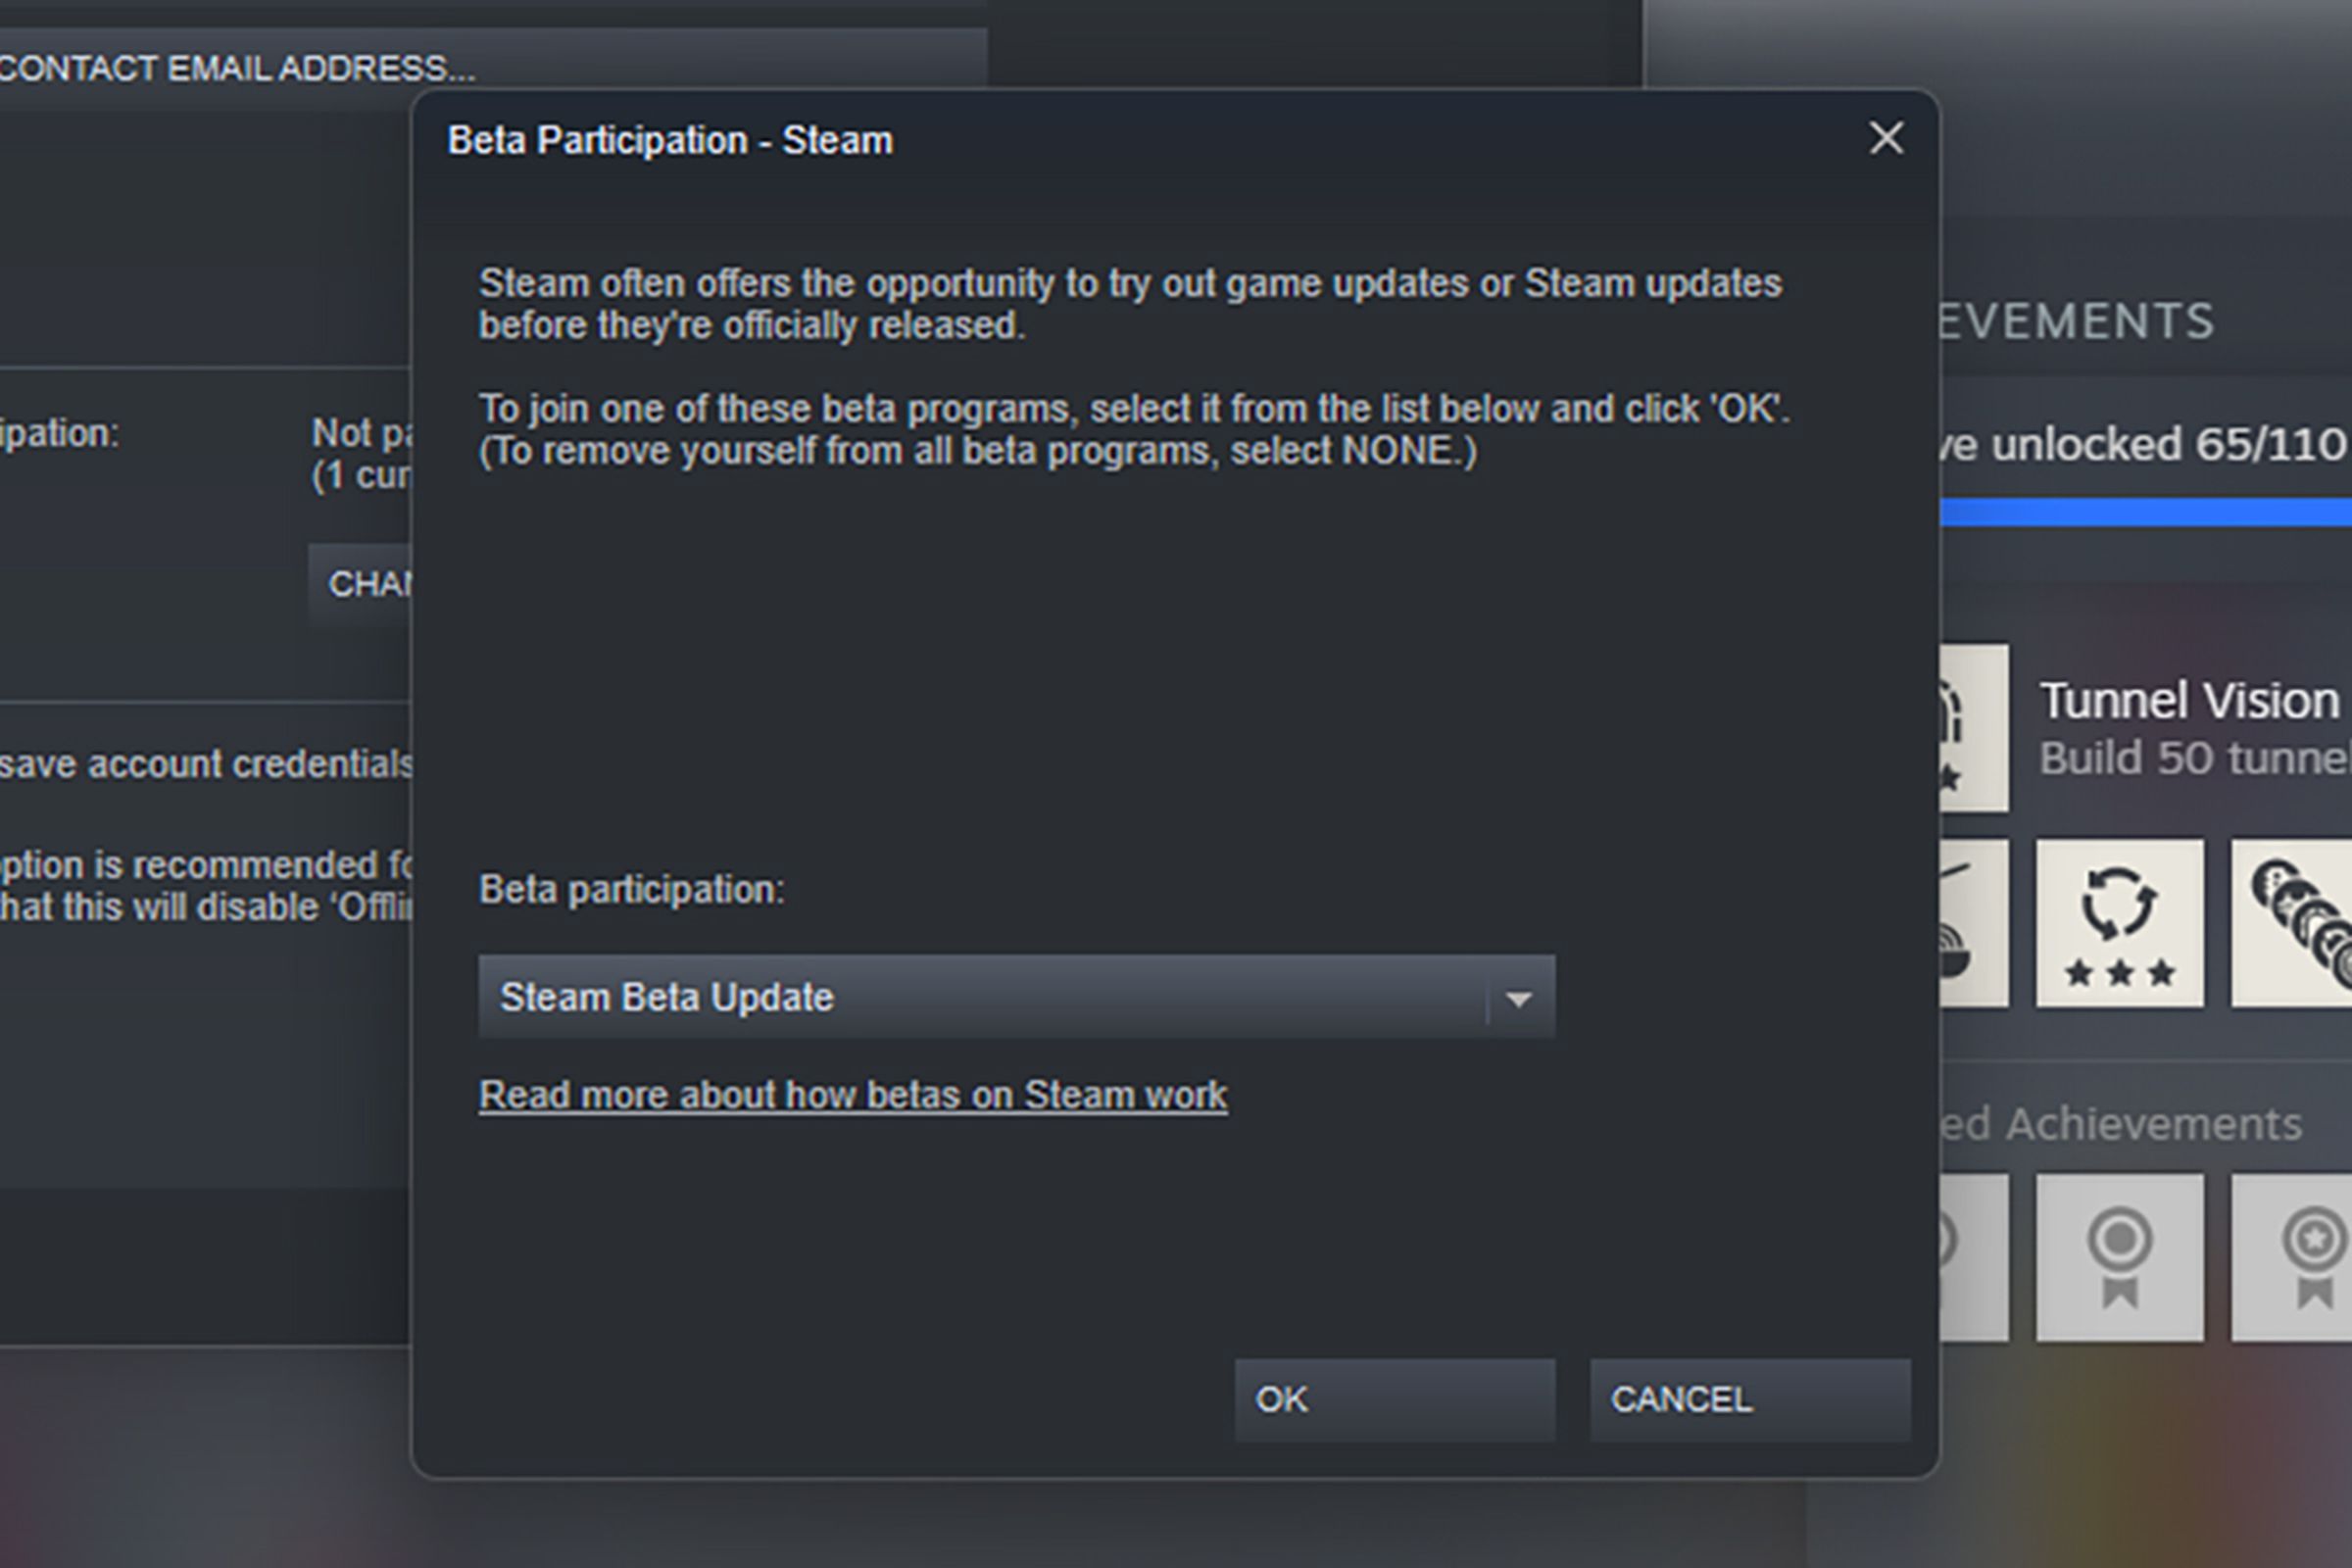 Screen pop-up headed “Beta Participation - Steam” with text describing how to join the beta program.